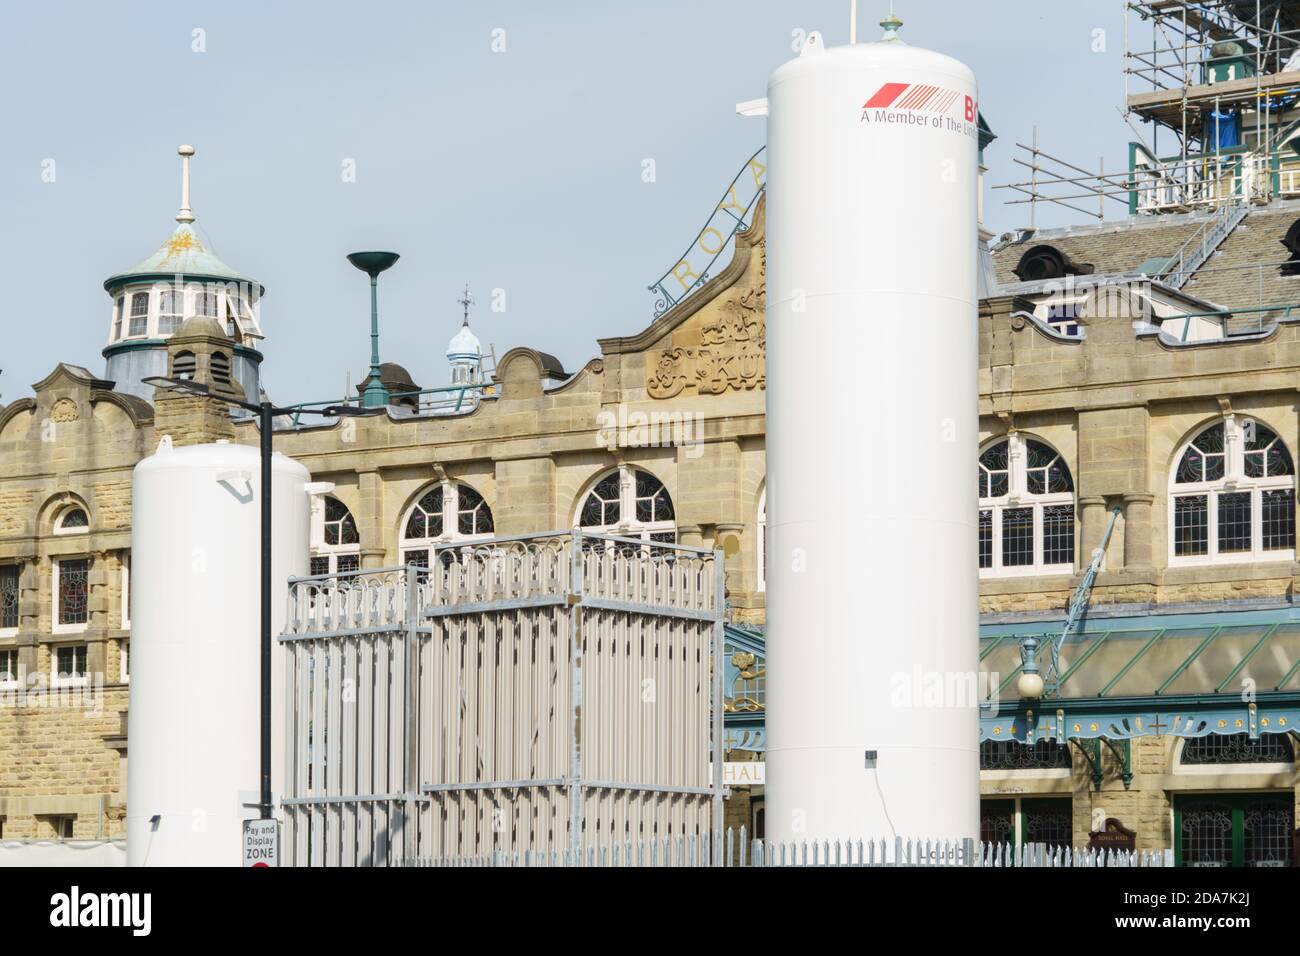 Two white liquid oxygen bottles were set up in front of Royal Hall, Harrogate, North Yorkshire, England, UK. Stock Photo